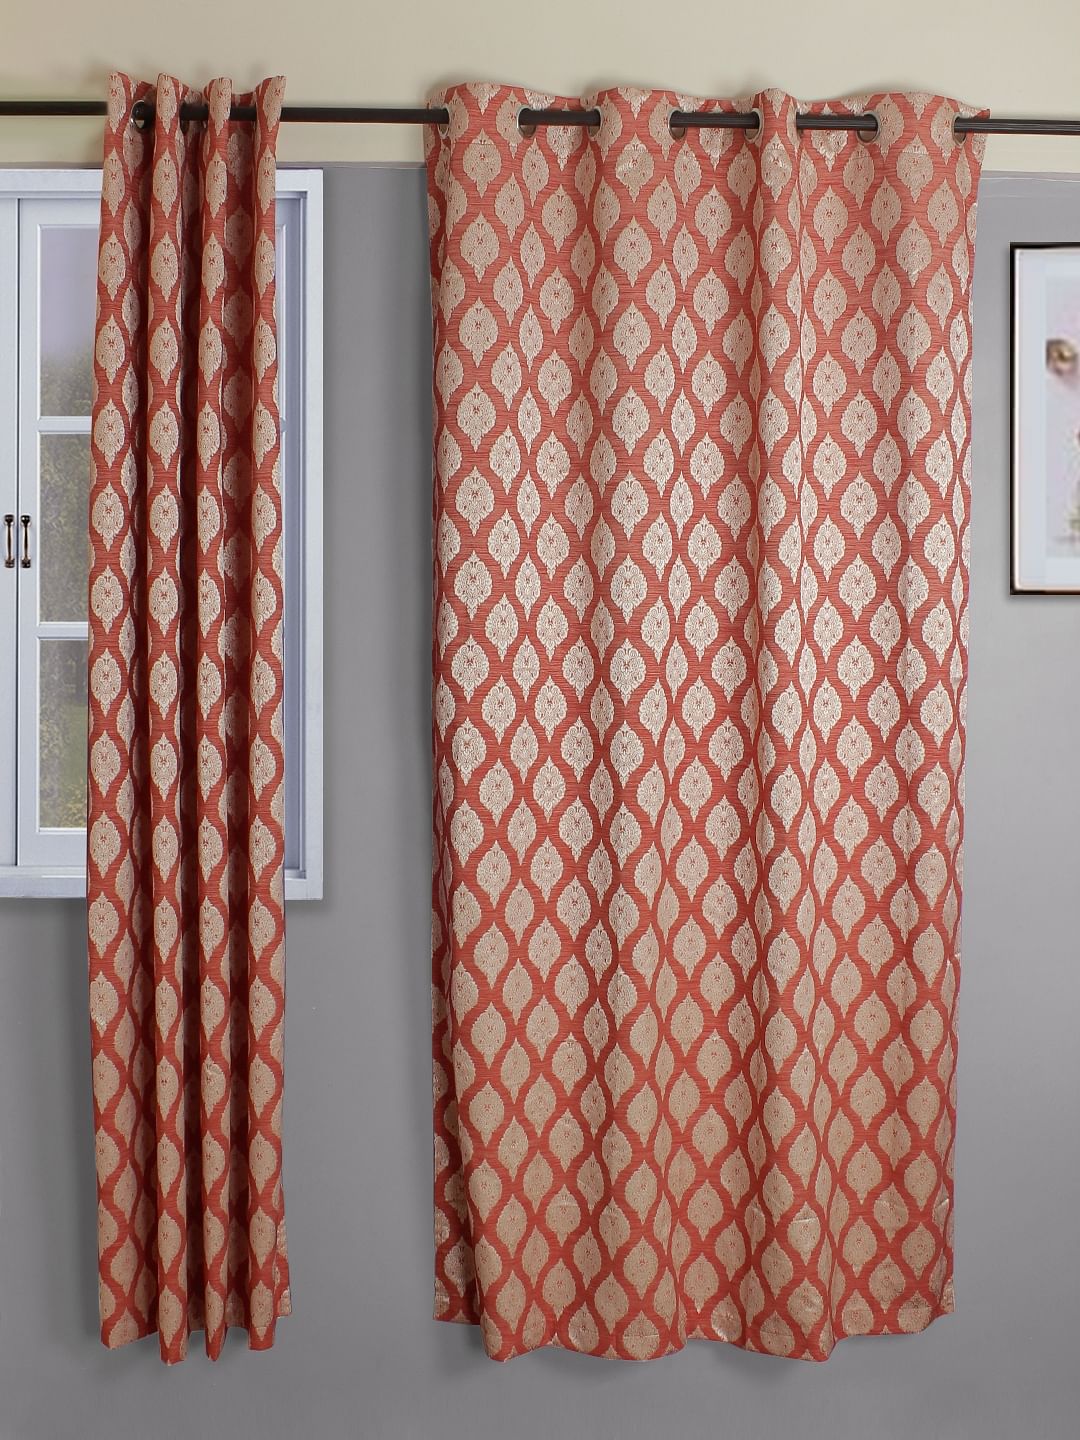 Amour Set Of 2 Jacquard Dim Out Door Curtains 7 Feet in Rust Colour